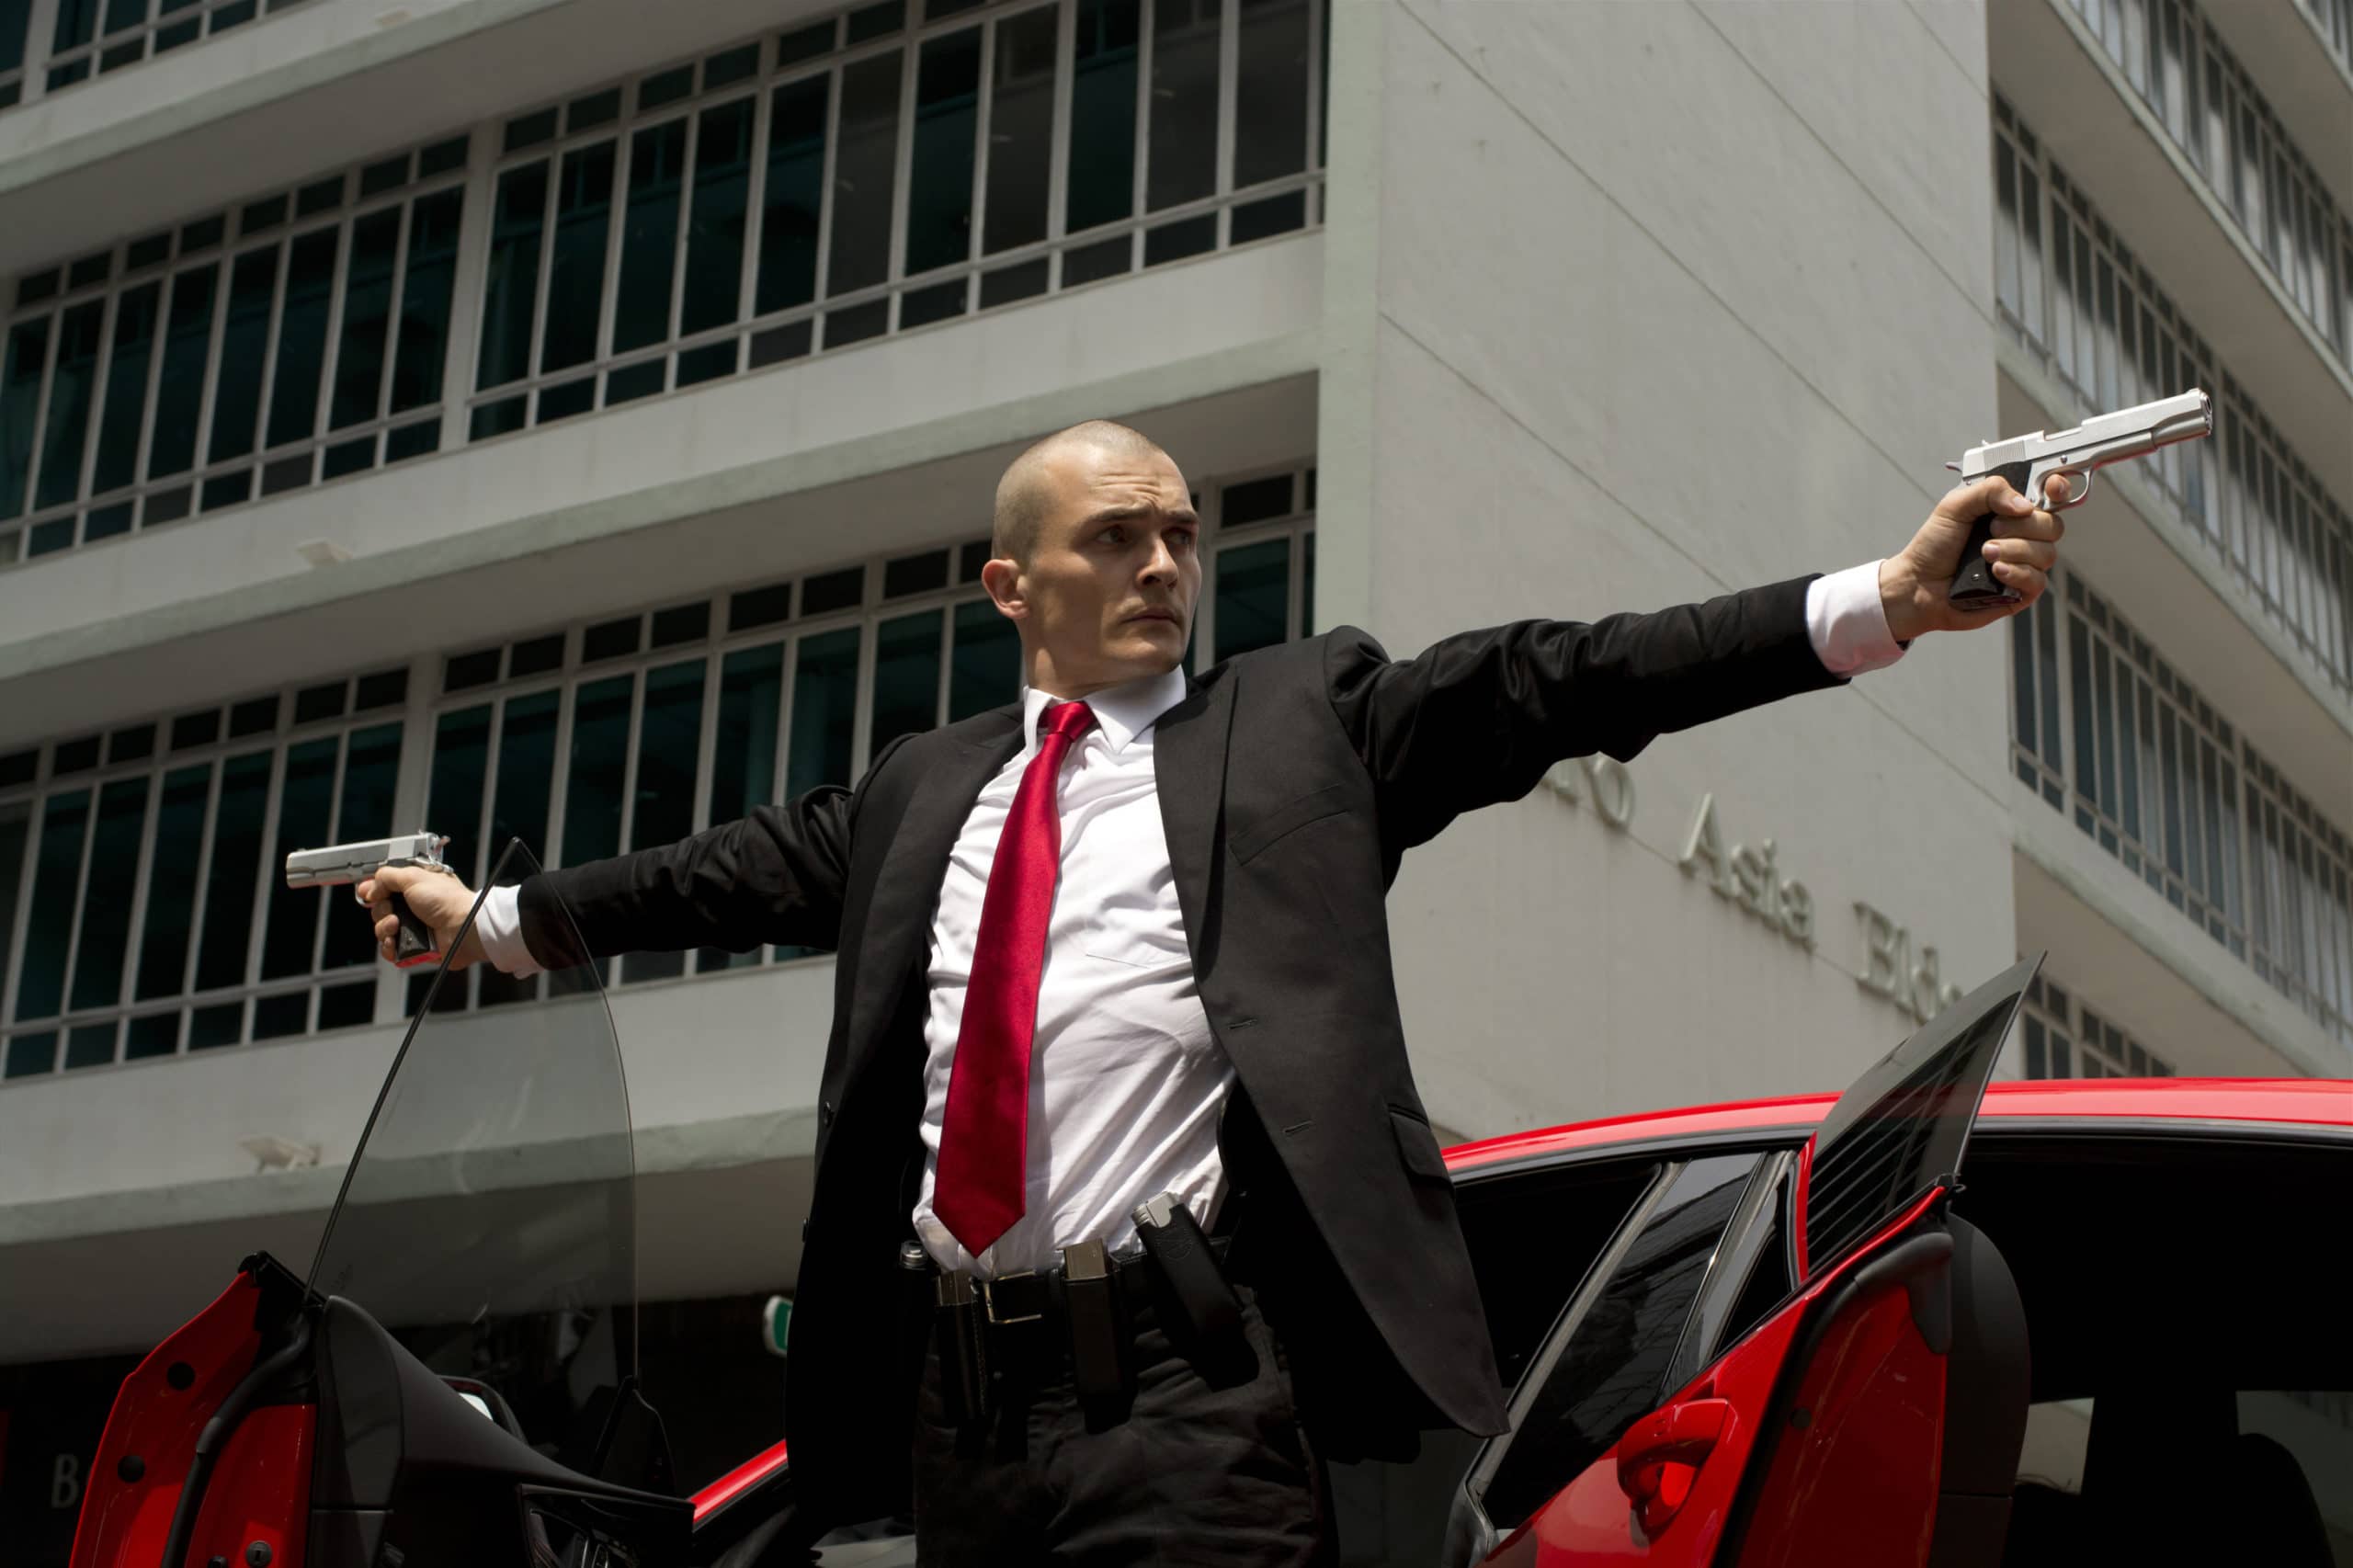 Rupert Friend in Hitman: Agent 47 - Photo provided by costume designer Bina Daigeler - Photo credit: Reiner Bajo//R.Bajo - © TM and © 2014 Twentieth Century Fox Film Corporation. All rights reserved. Not for sale or duplication.